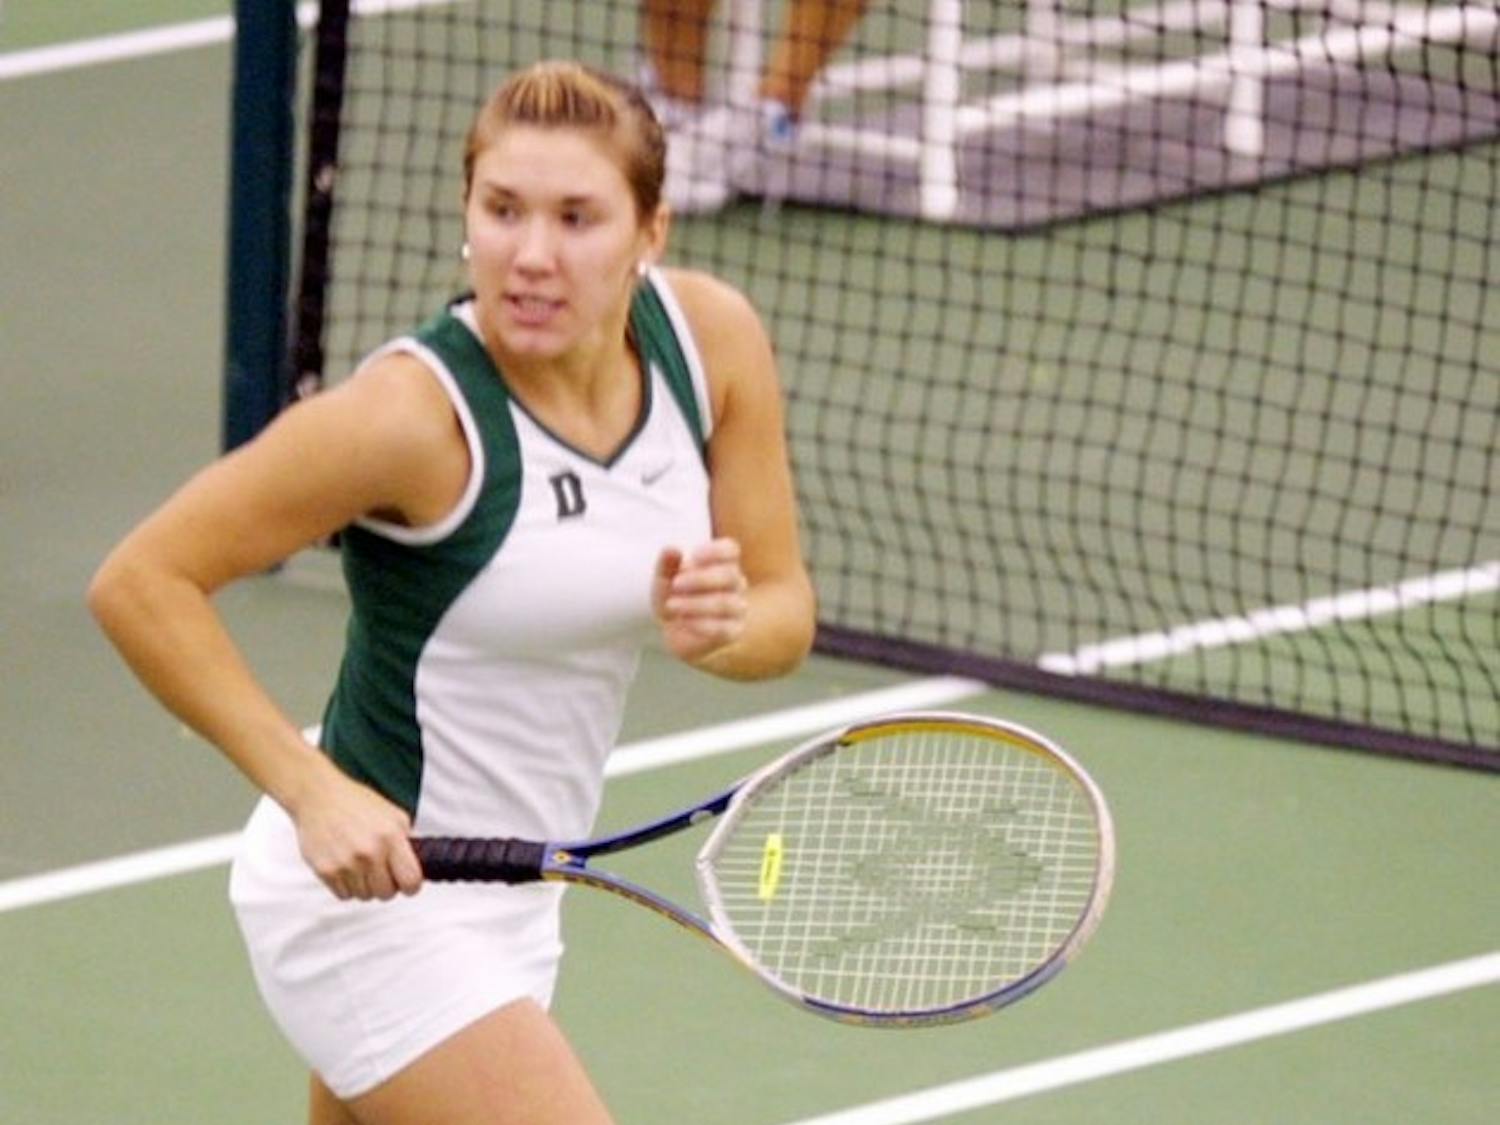 Women's tennis took another hit this weekend, dropping two Ancient Eight matches in as many days.